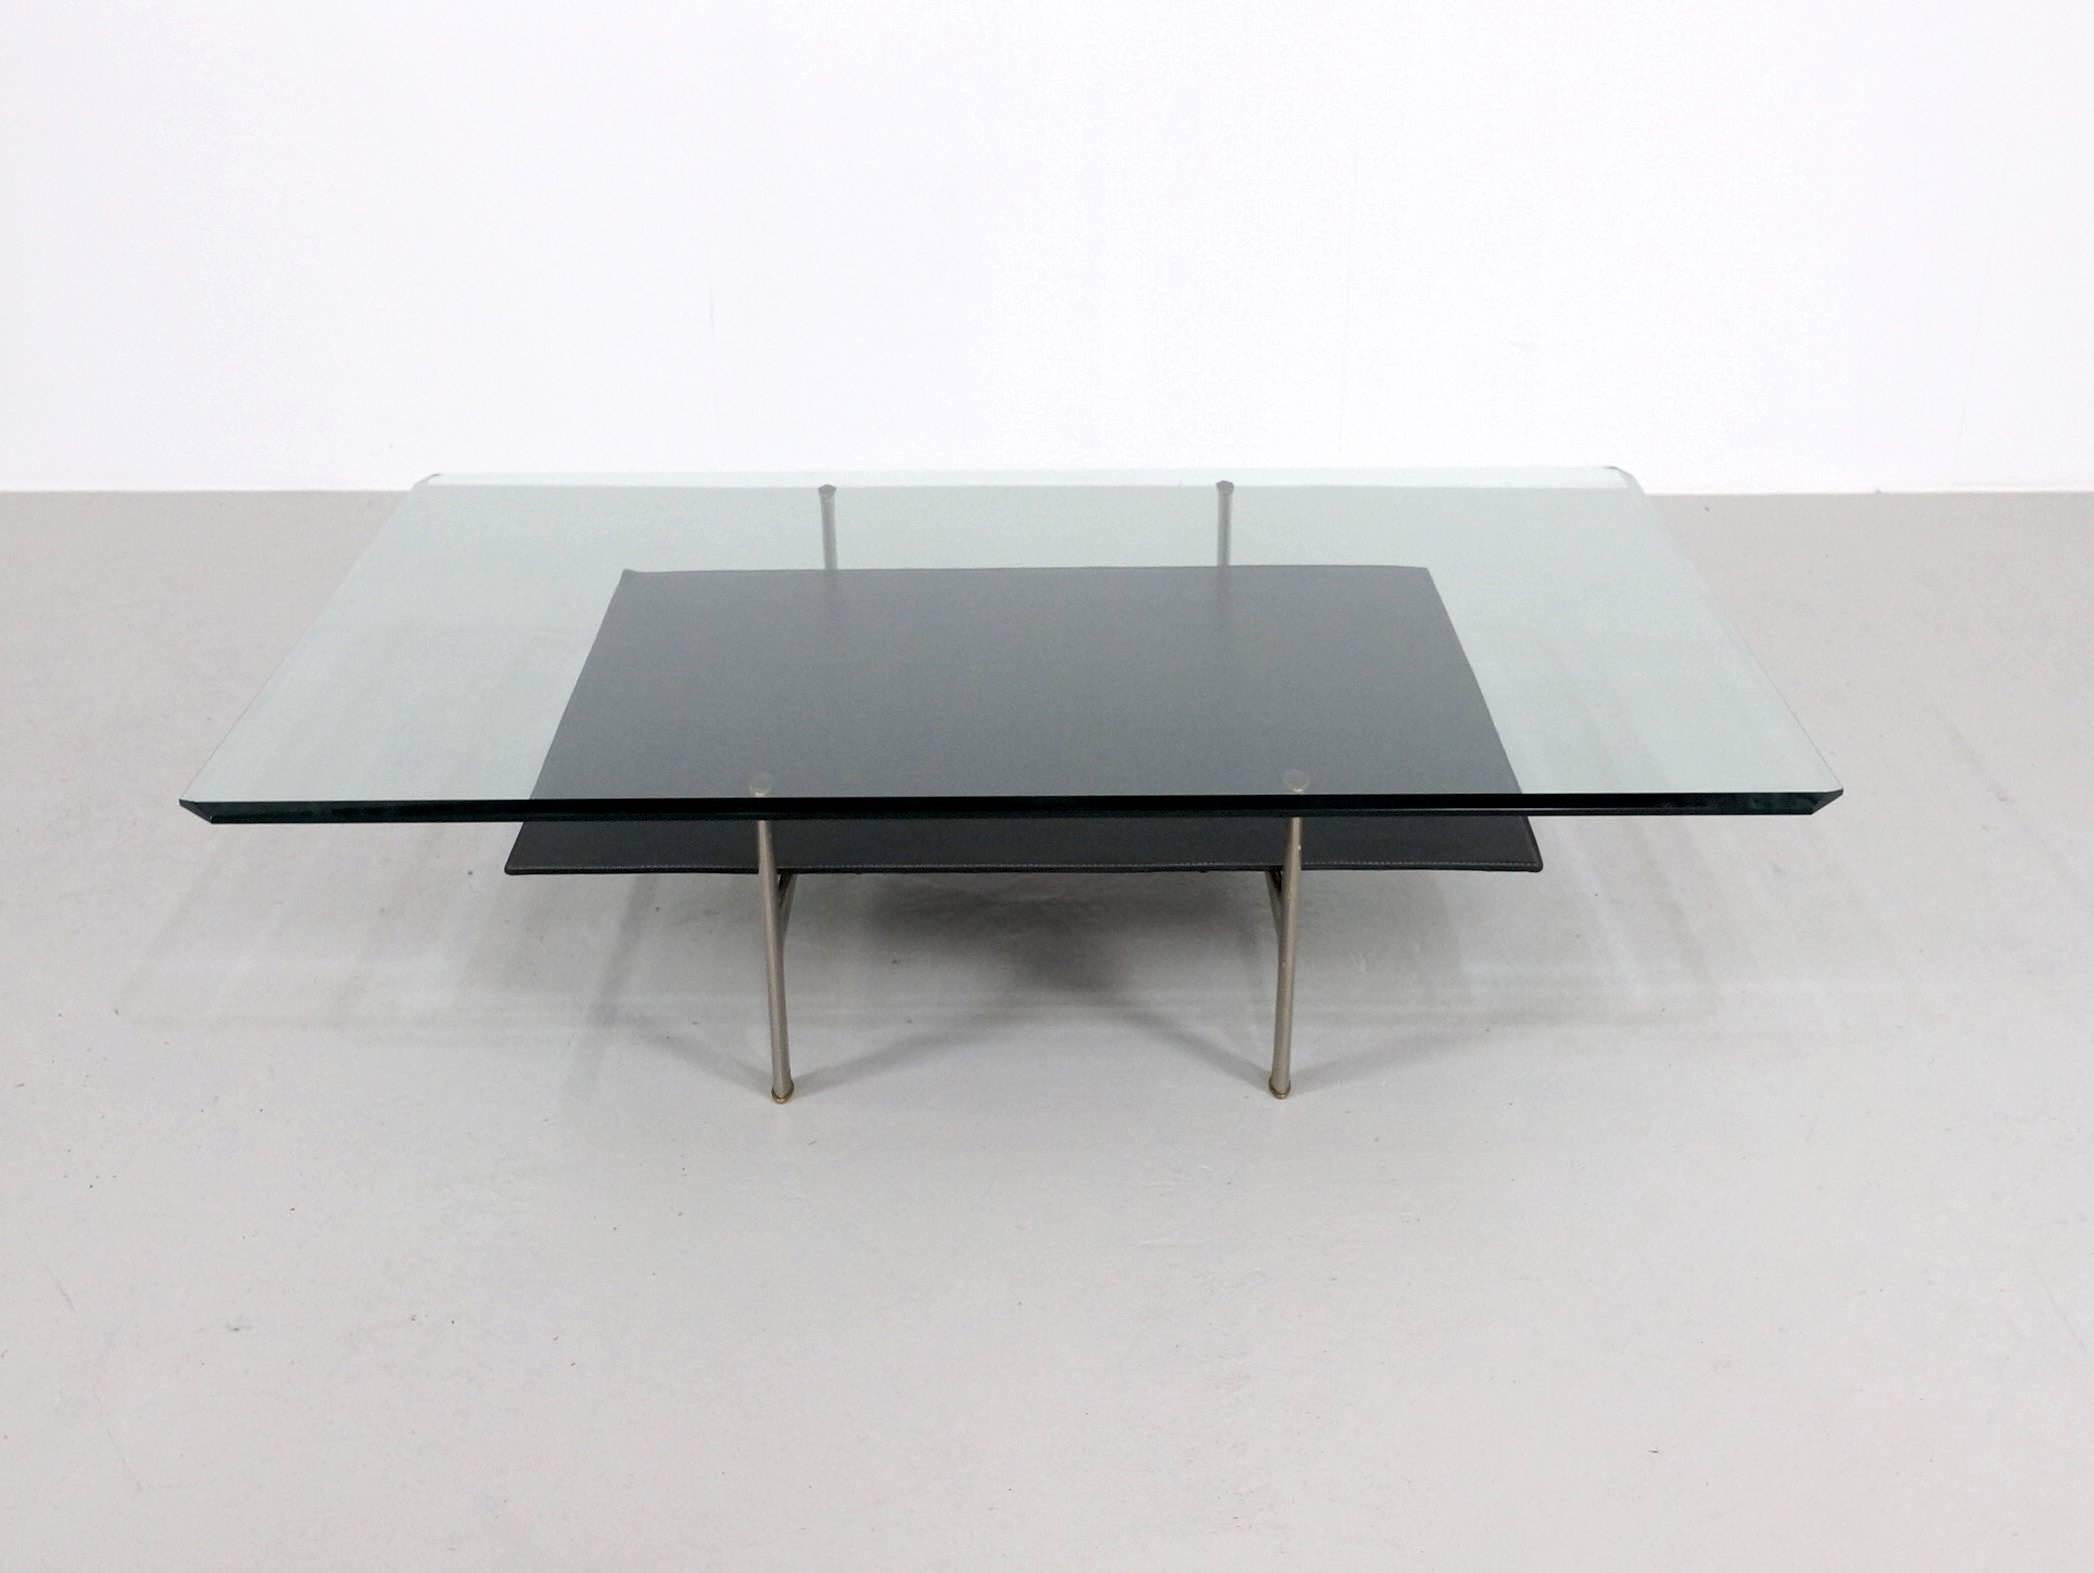 Low coffee table designed by Antonio Citterio and Paolo Nava for B&B Italia in the Diesis series. Upper top in transparent crystal glass with ground edges, the lower top is covered with black leather and a brushed aluminum frame. 
B&B Italia's